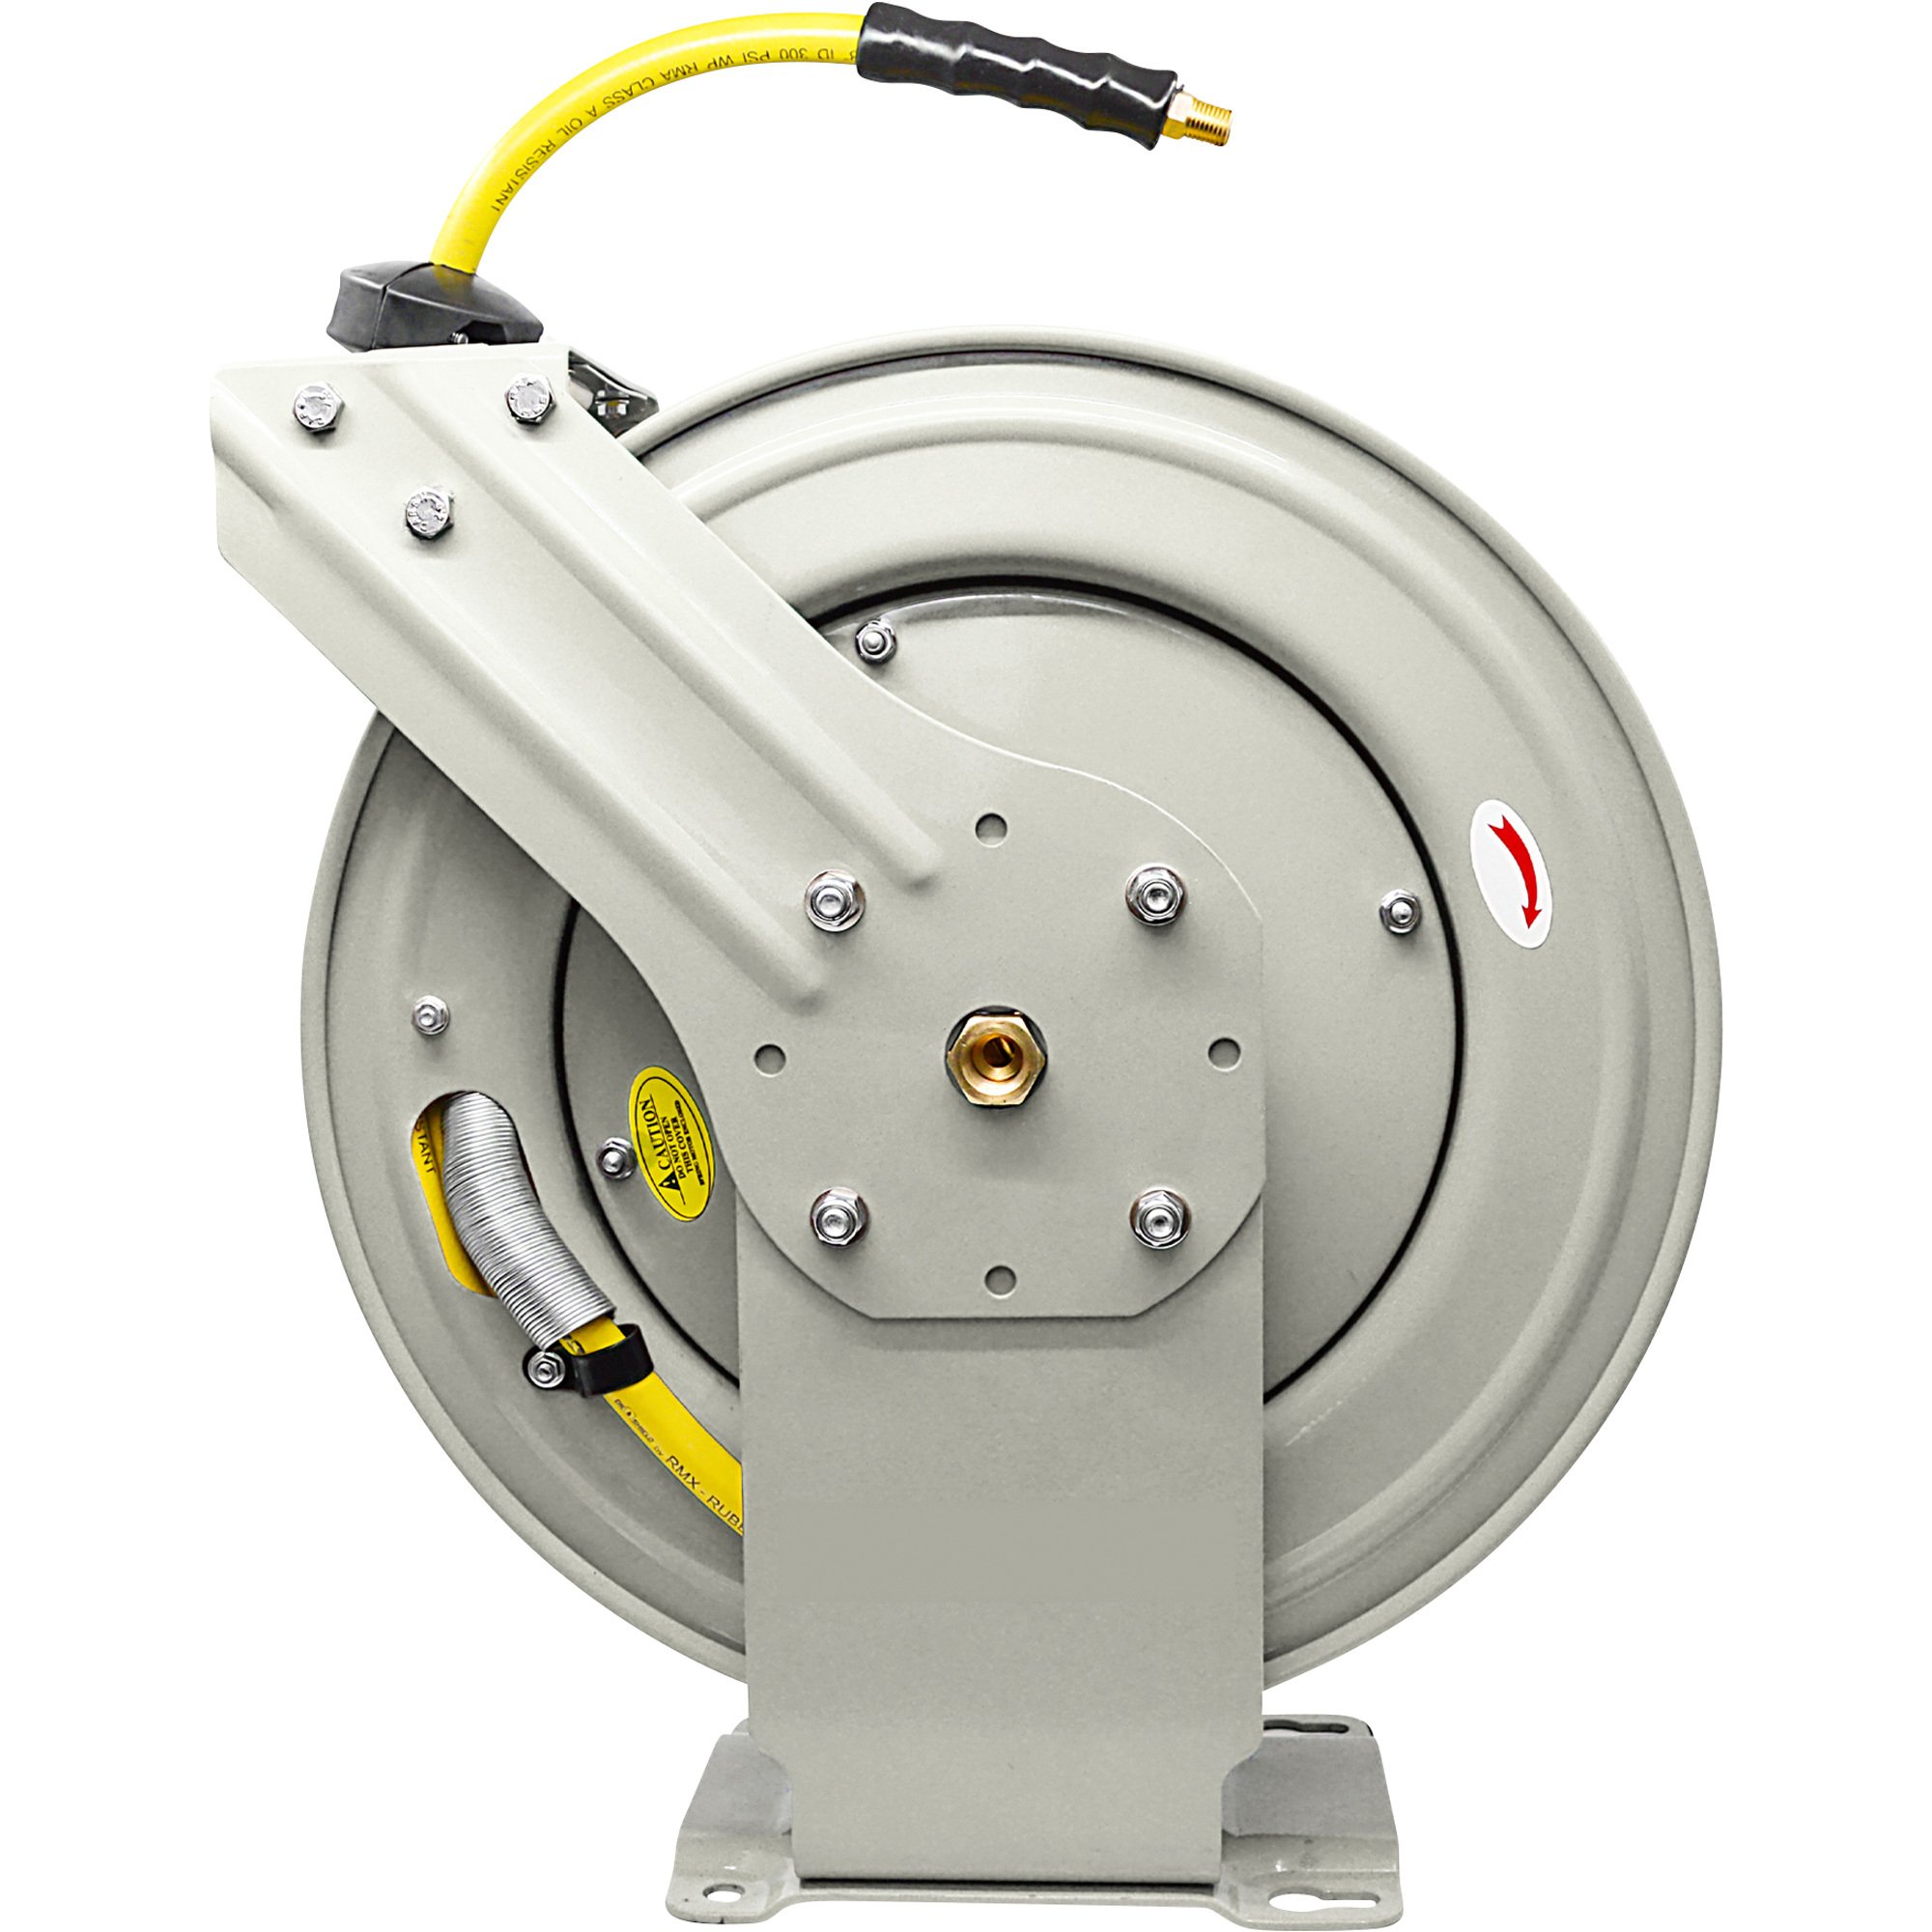 Klutch Auto-Rewind Dual Arm Air Hose Reel, with 3/8in. x 50ft. Hose, 300 PSI